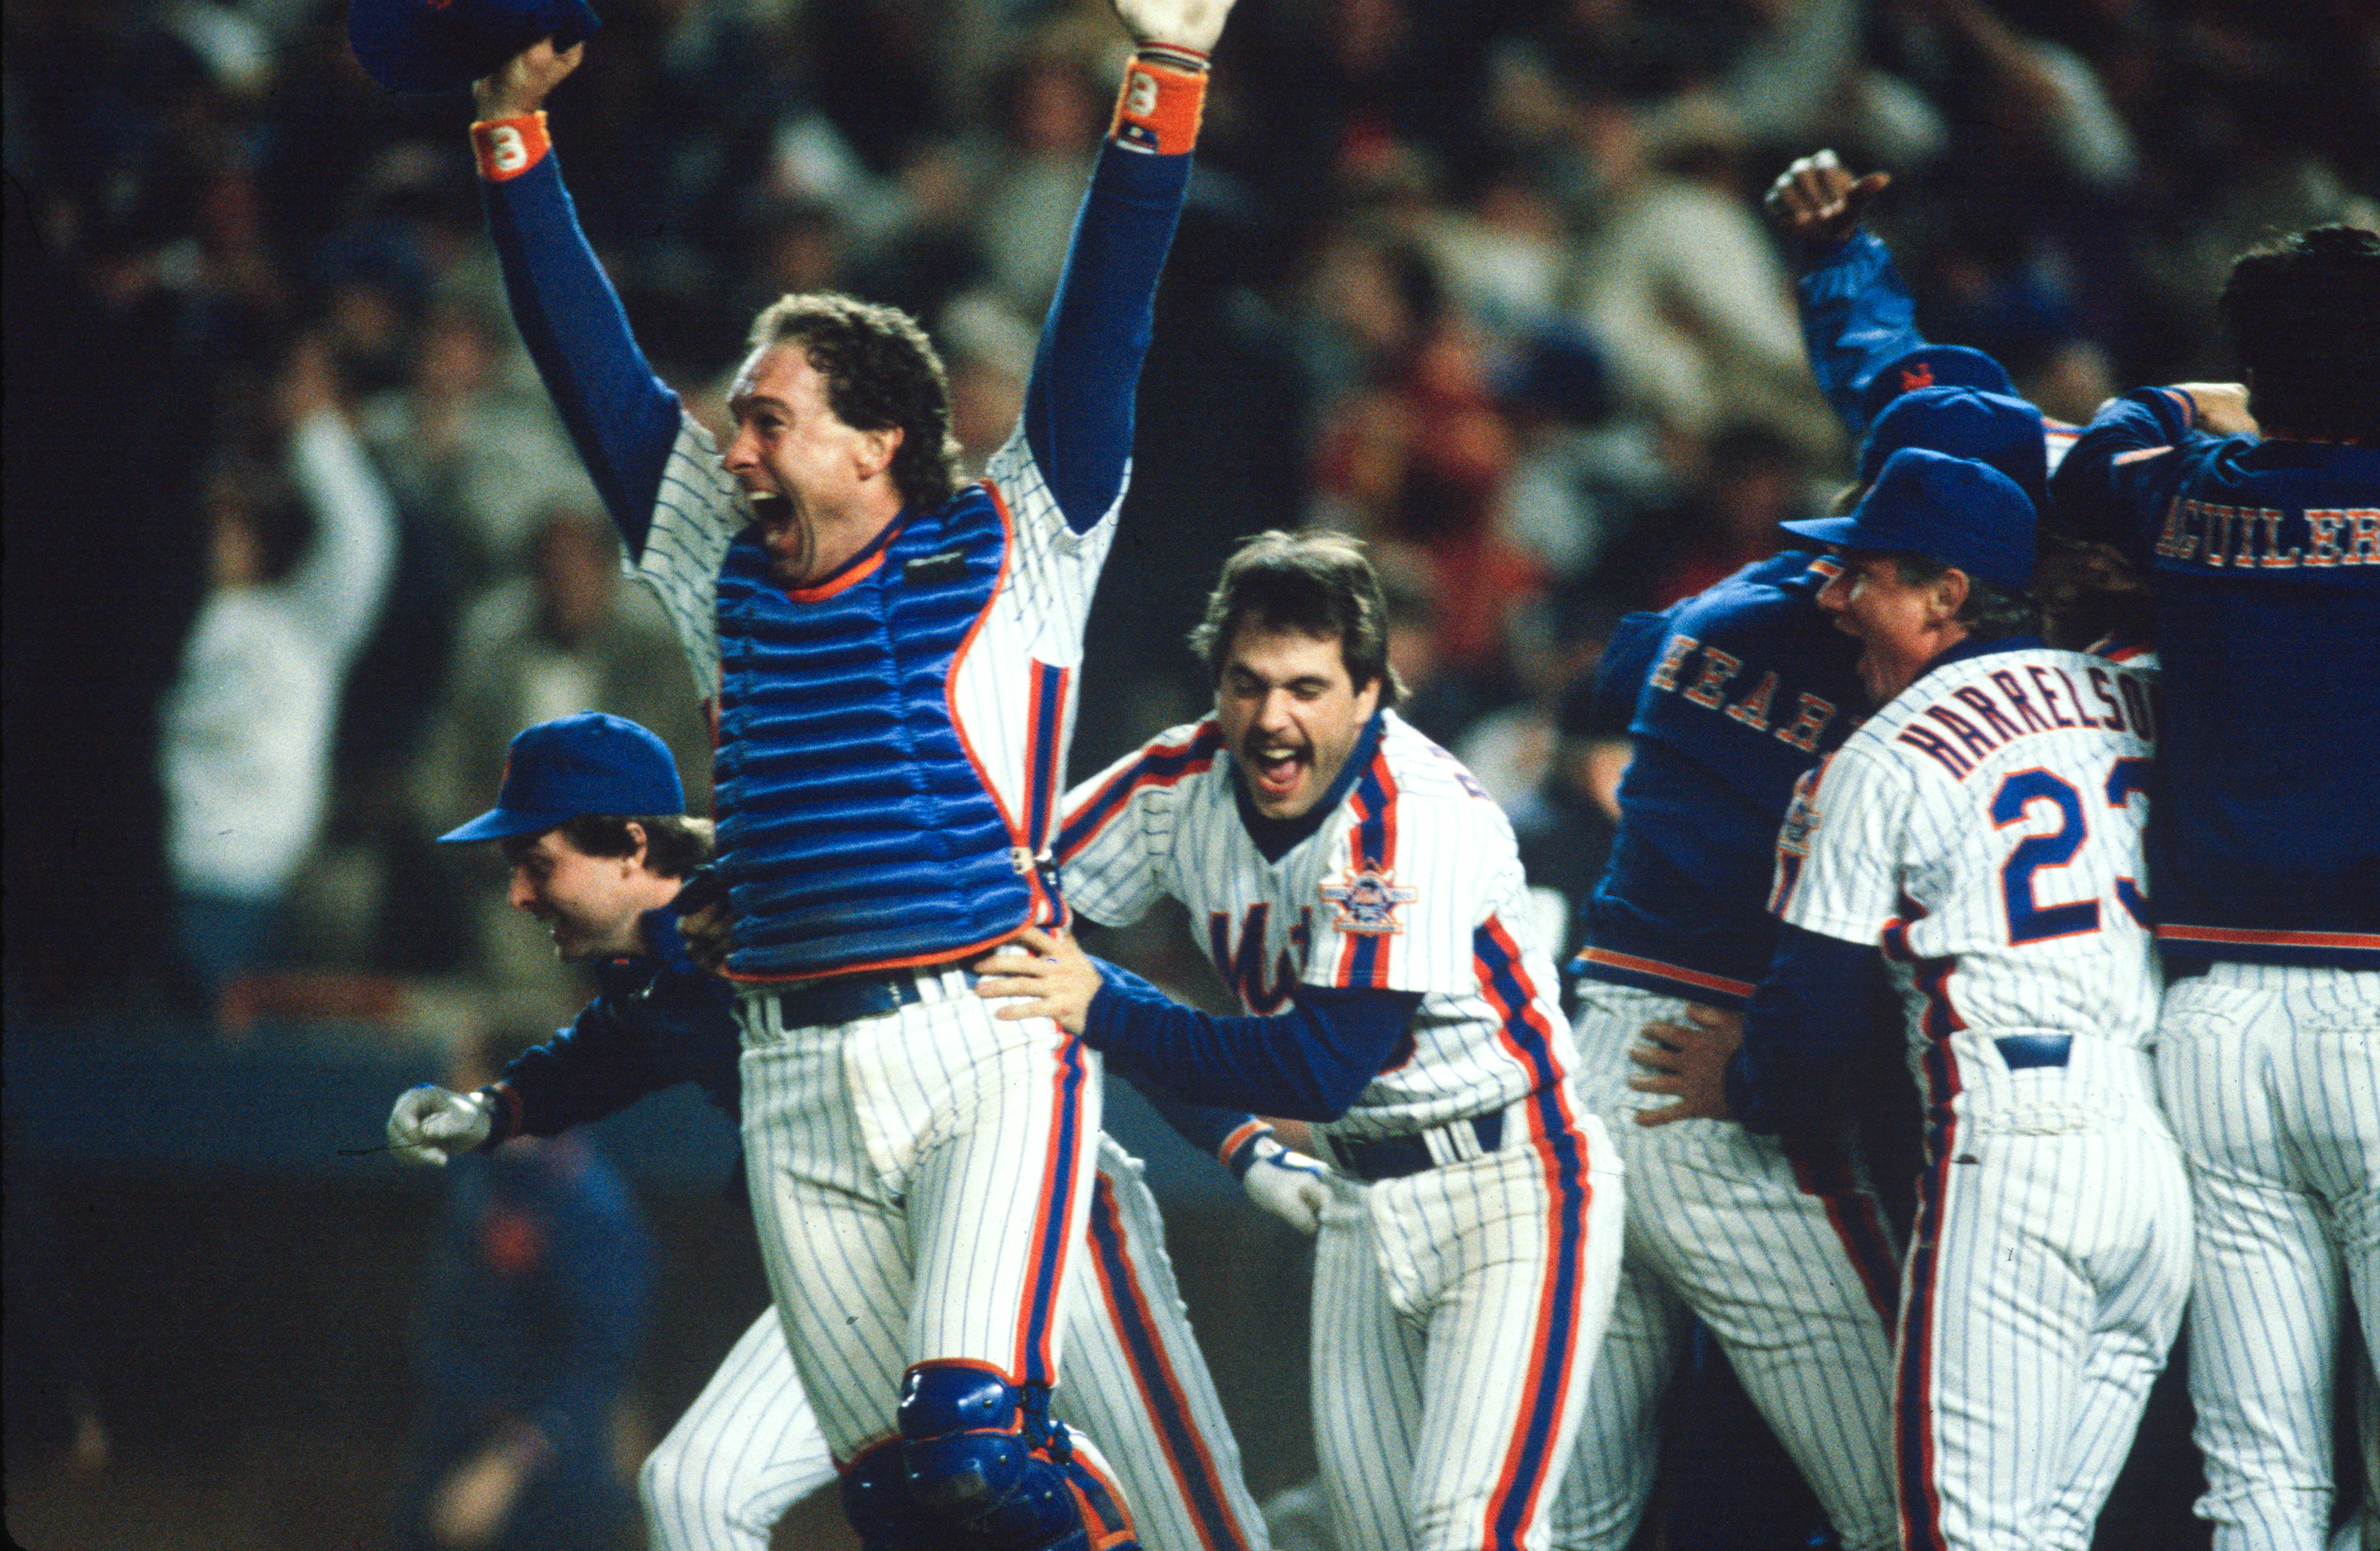 A brief history of the Mets' elevengame winning streaks